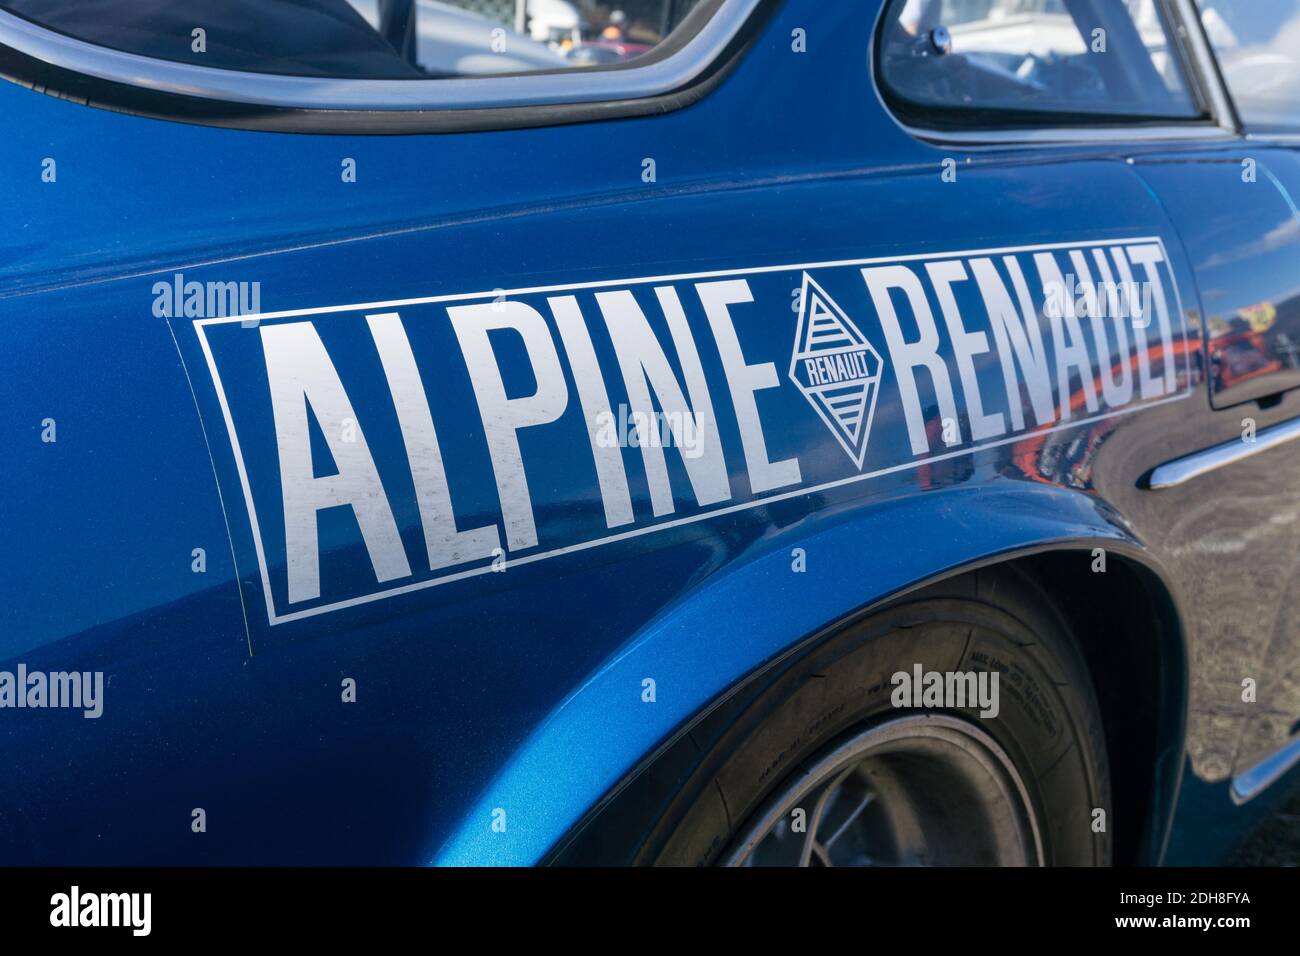 Close up detail of the rear side and wheel arch of a blue 1973 Alpine A110 1600 Si sports coupe, showing the Alpine Renault logo Stock Photo